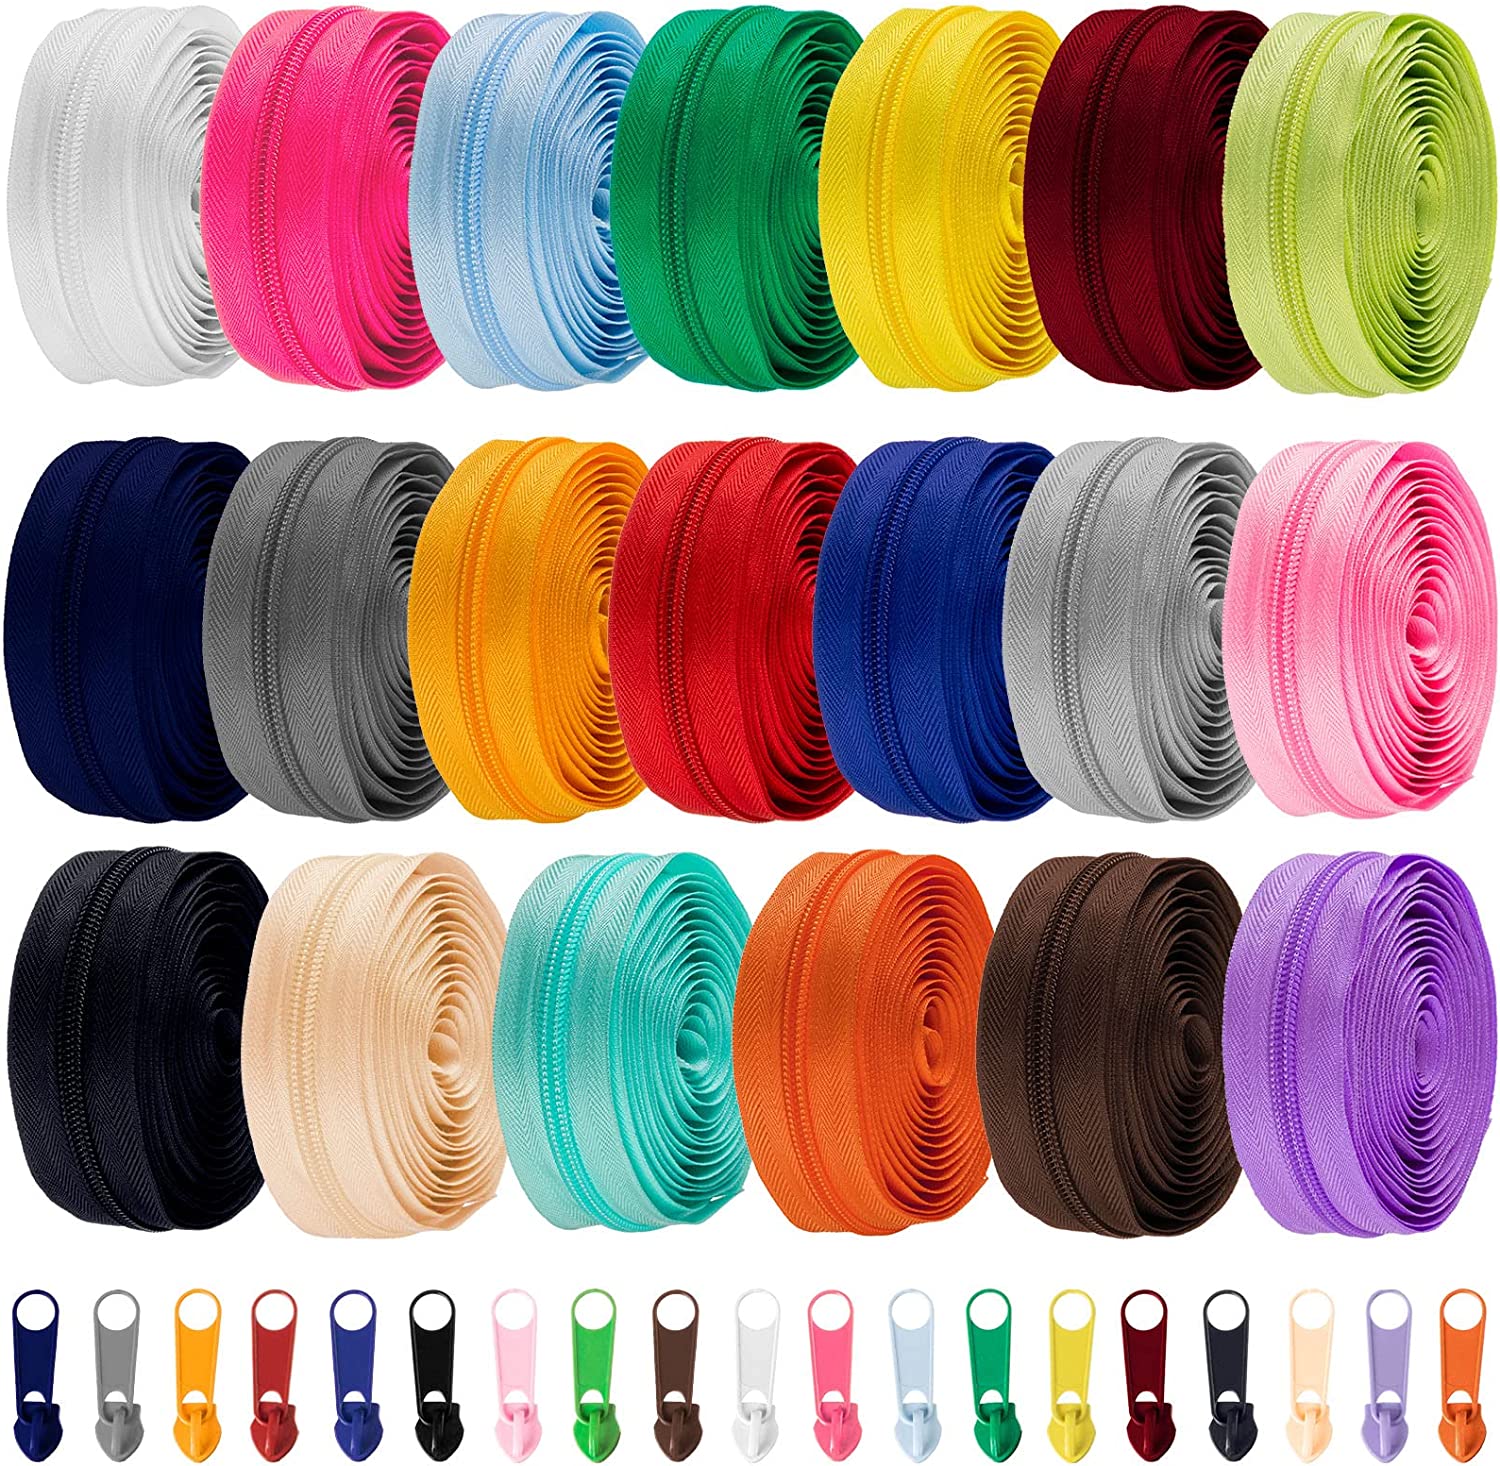 Yaka 60pcs 9 inch Nylon Coil Zippers Sewing Zippers for Tailor Sewing Crafts (20 Color)